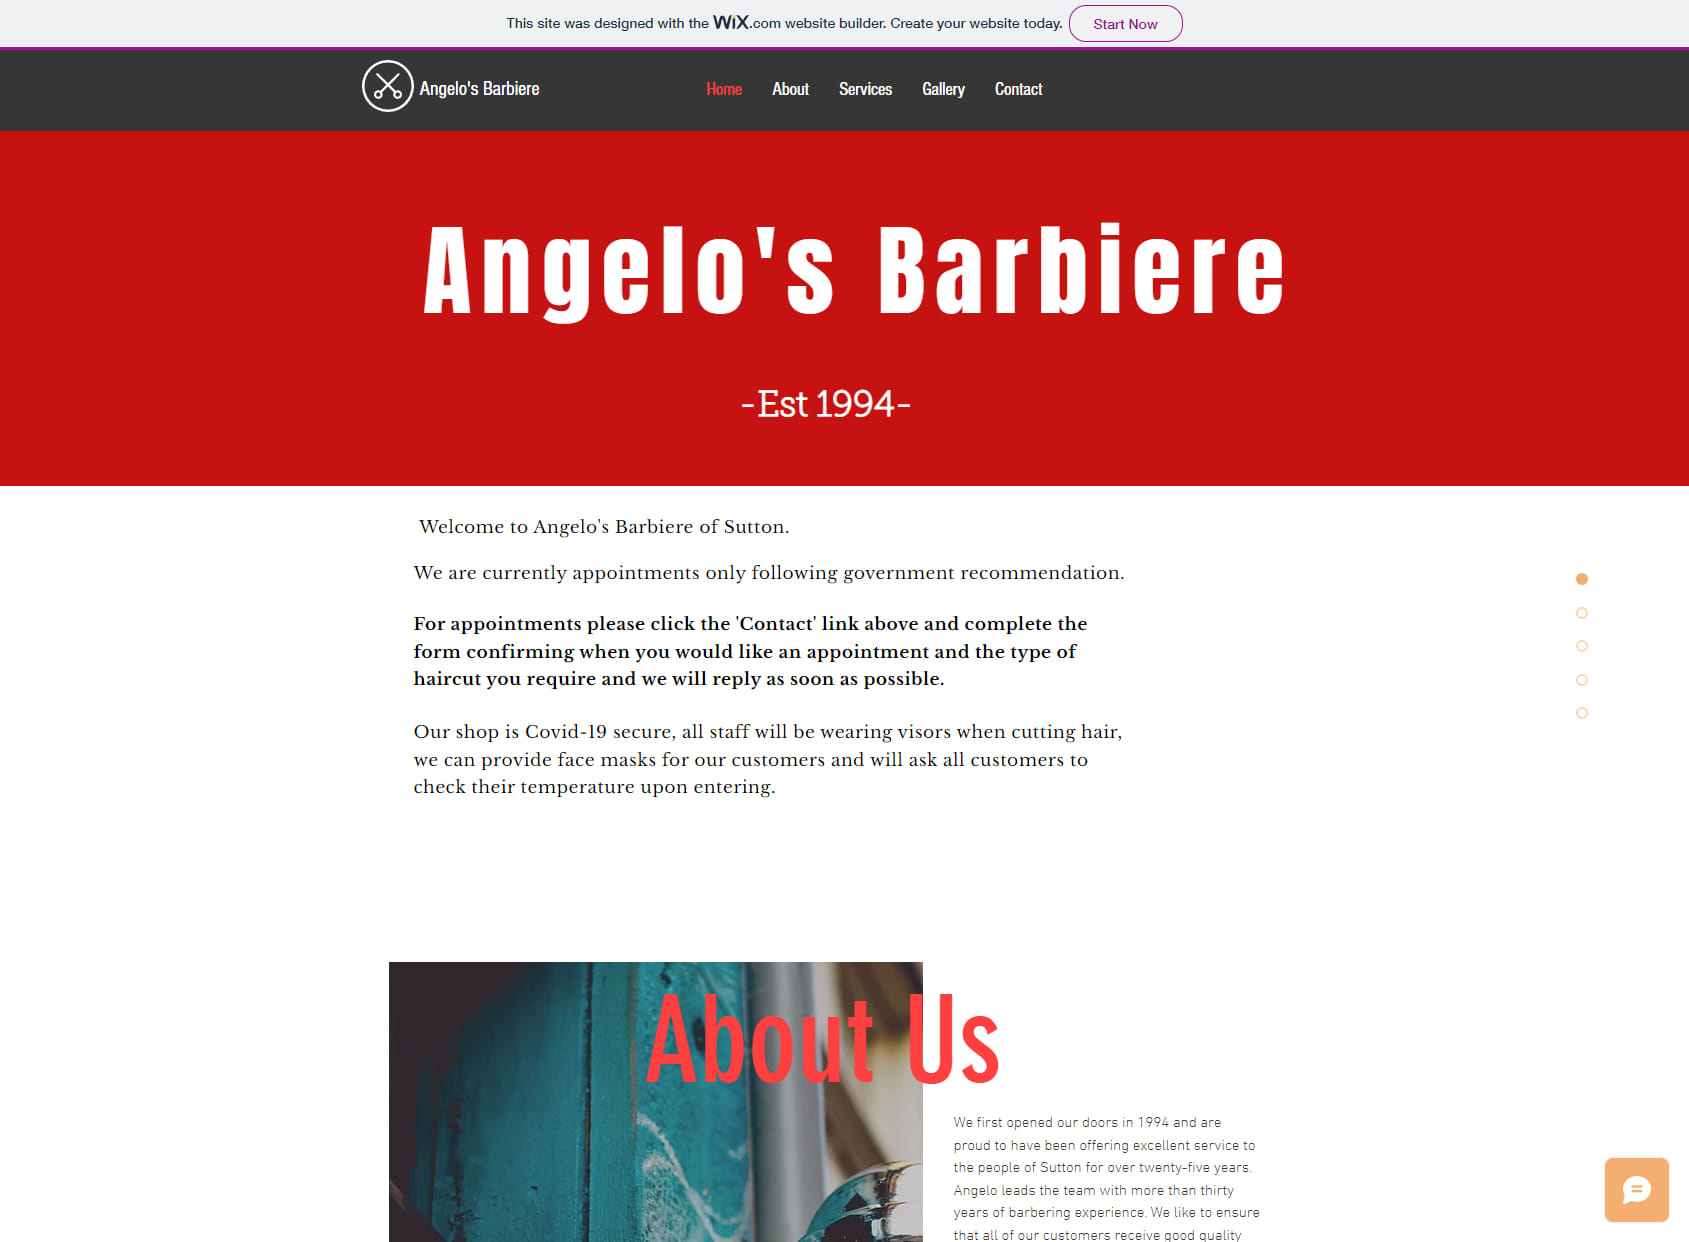 Angelo's Barbiere